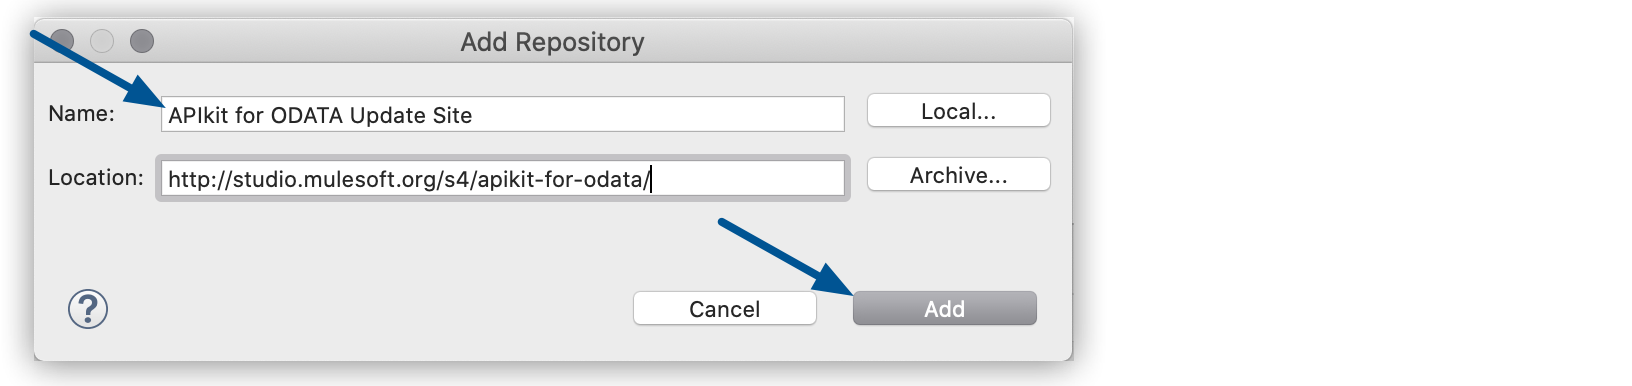 Window for adding a repository with the *Add* button, with the name the location fields highlighted